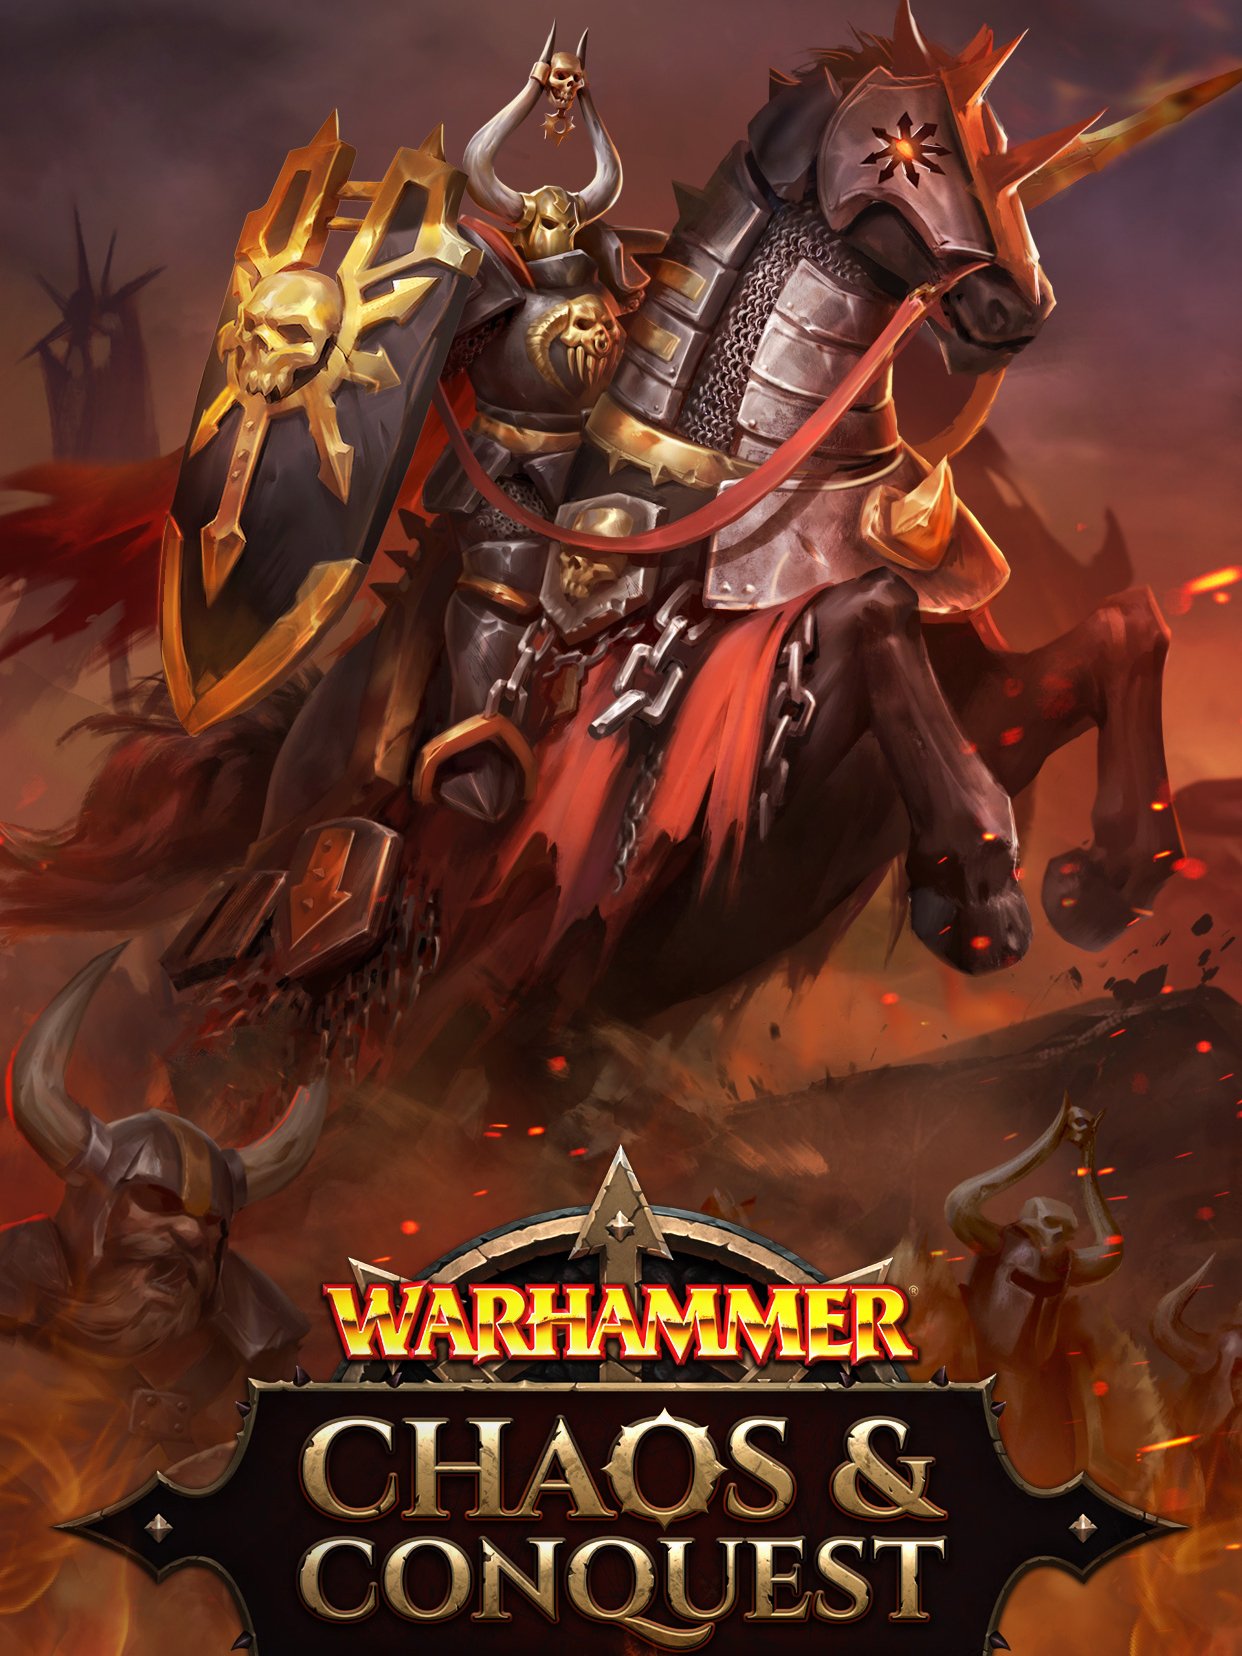 Image of Warhammer: Chaos & Conquest